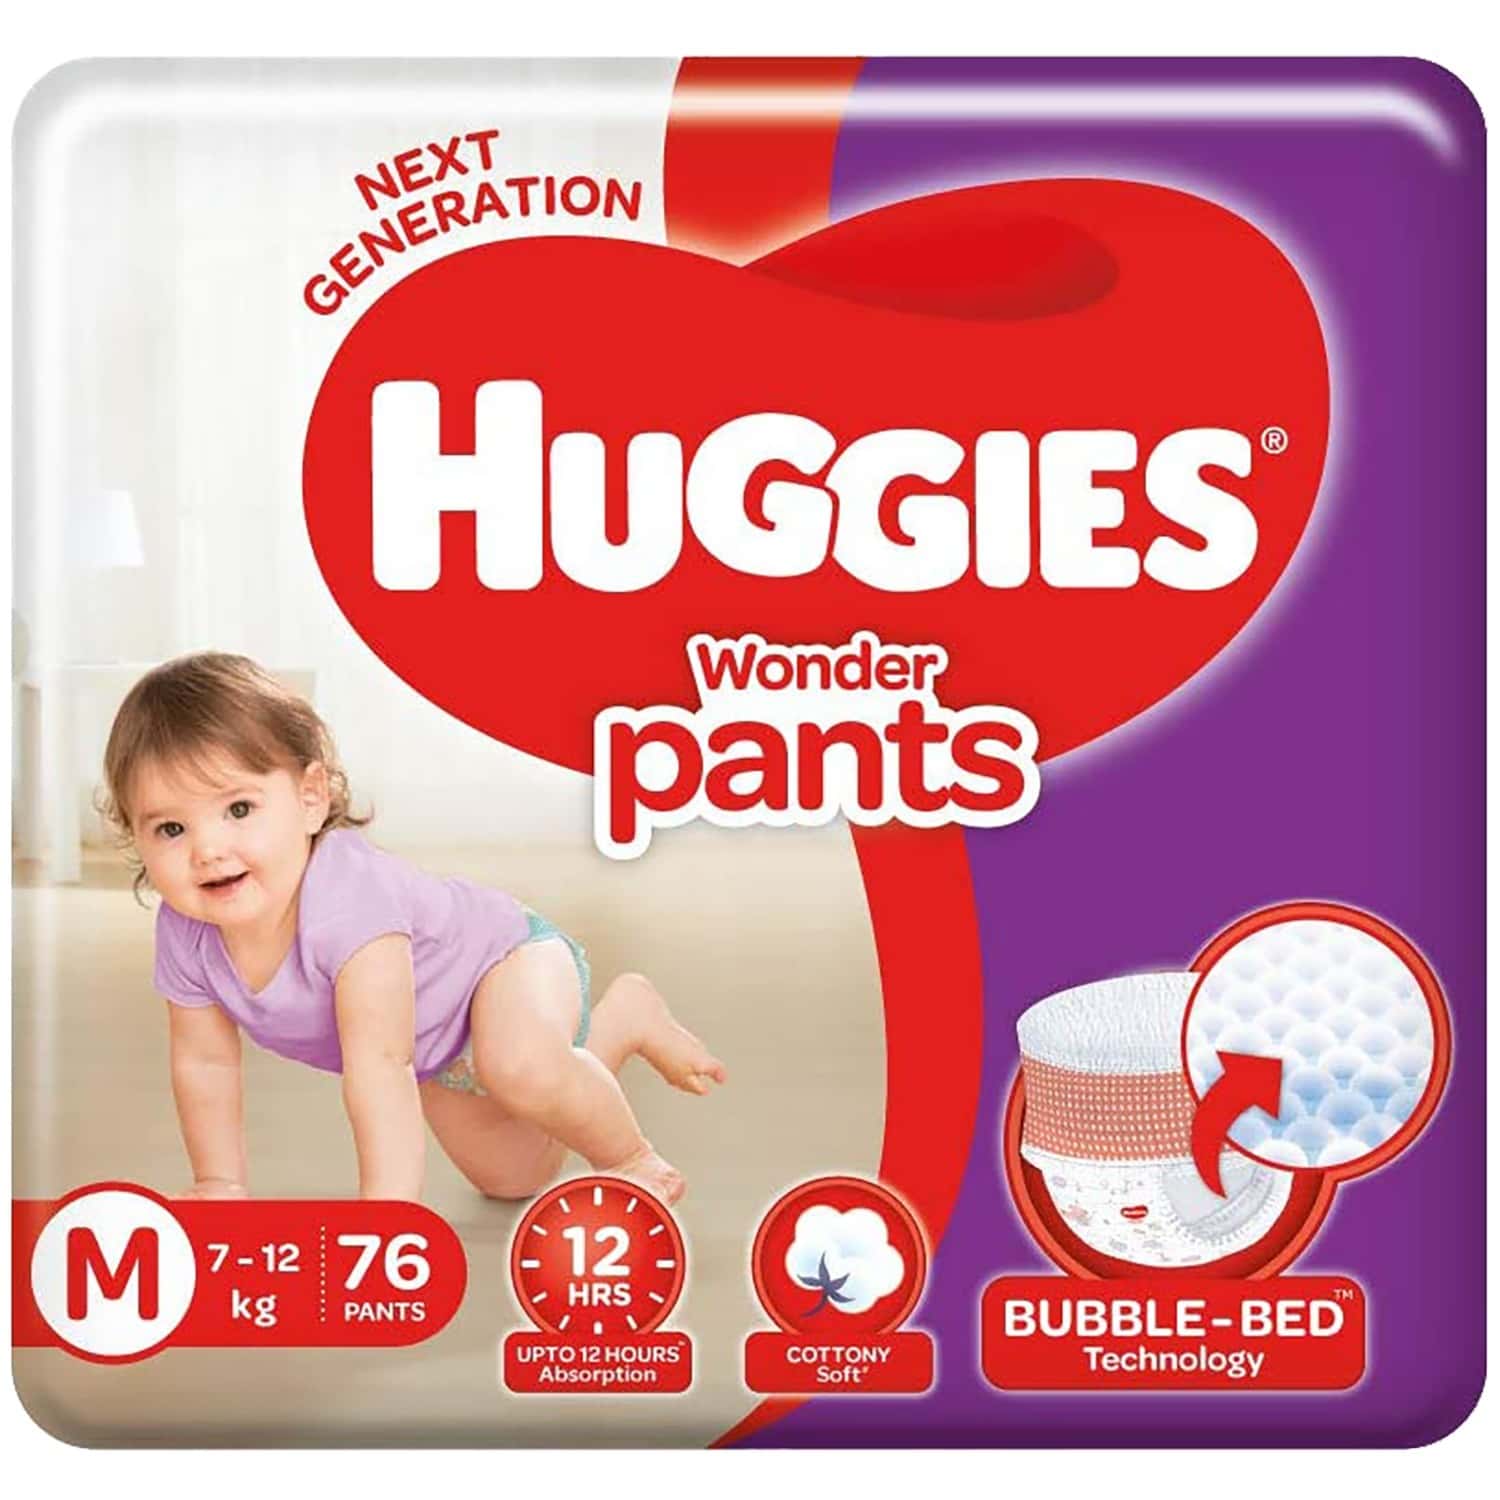 Huggies Wonder Pants XX Large Pant Style Diapers - 24 Pieces | eBay-cheohanoi.vn